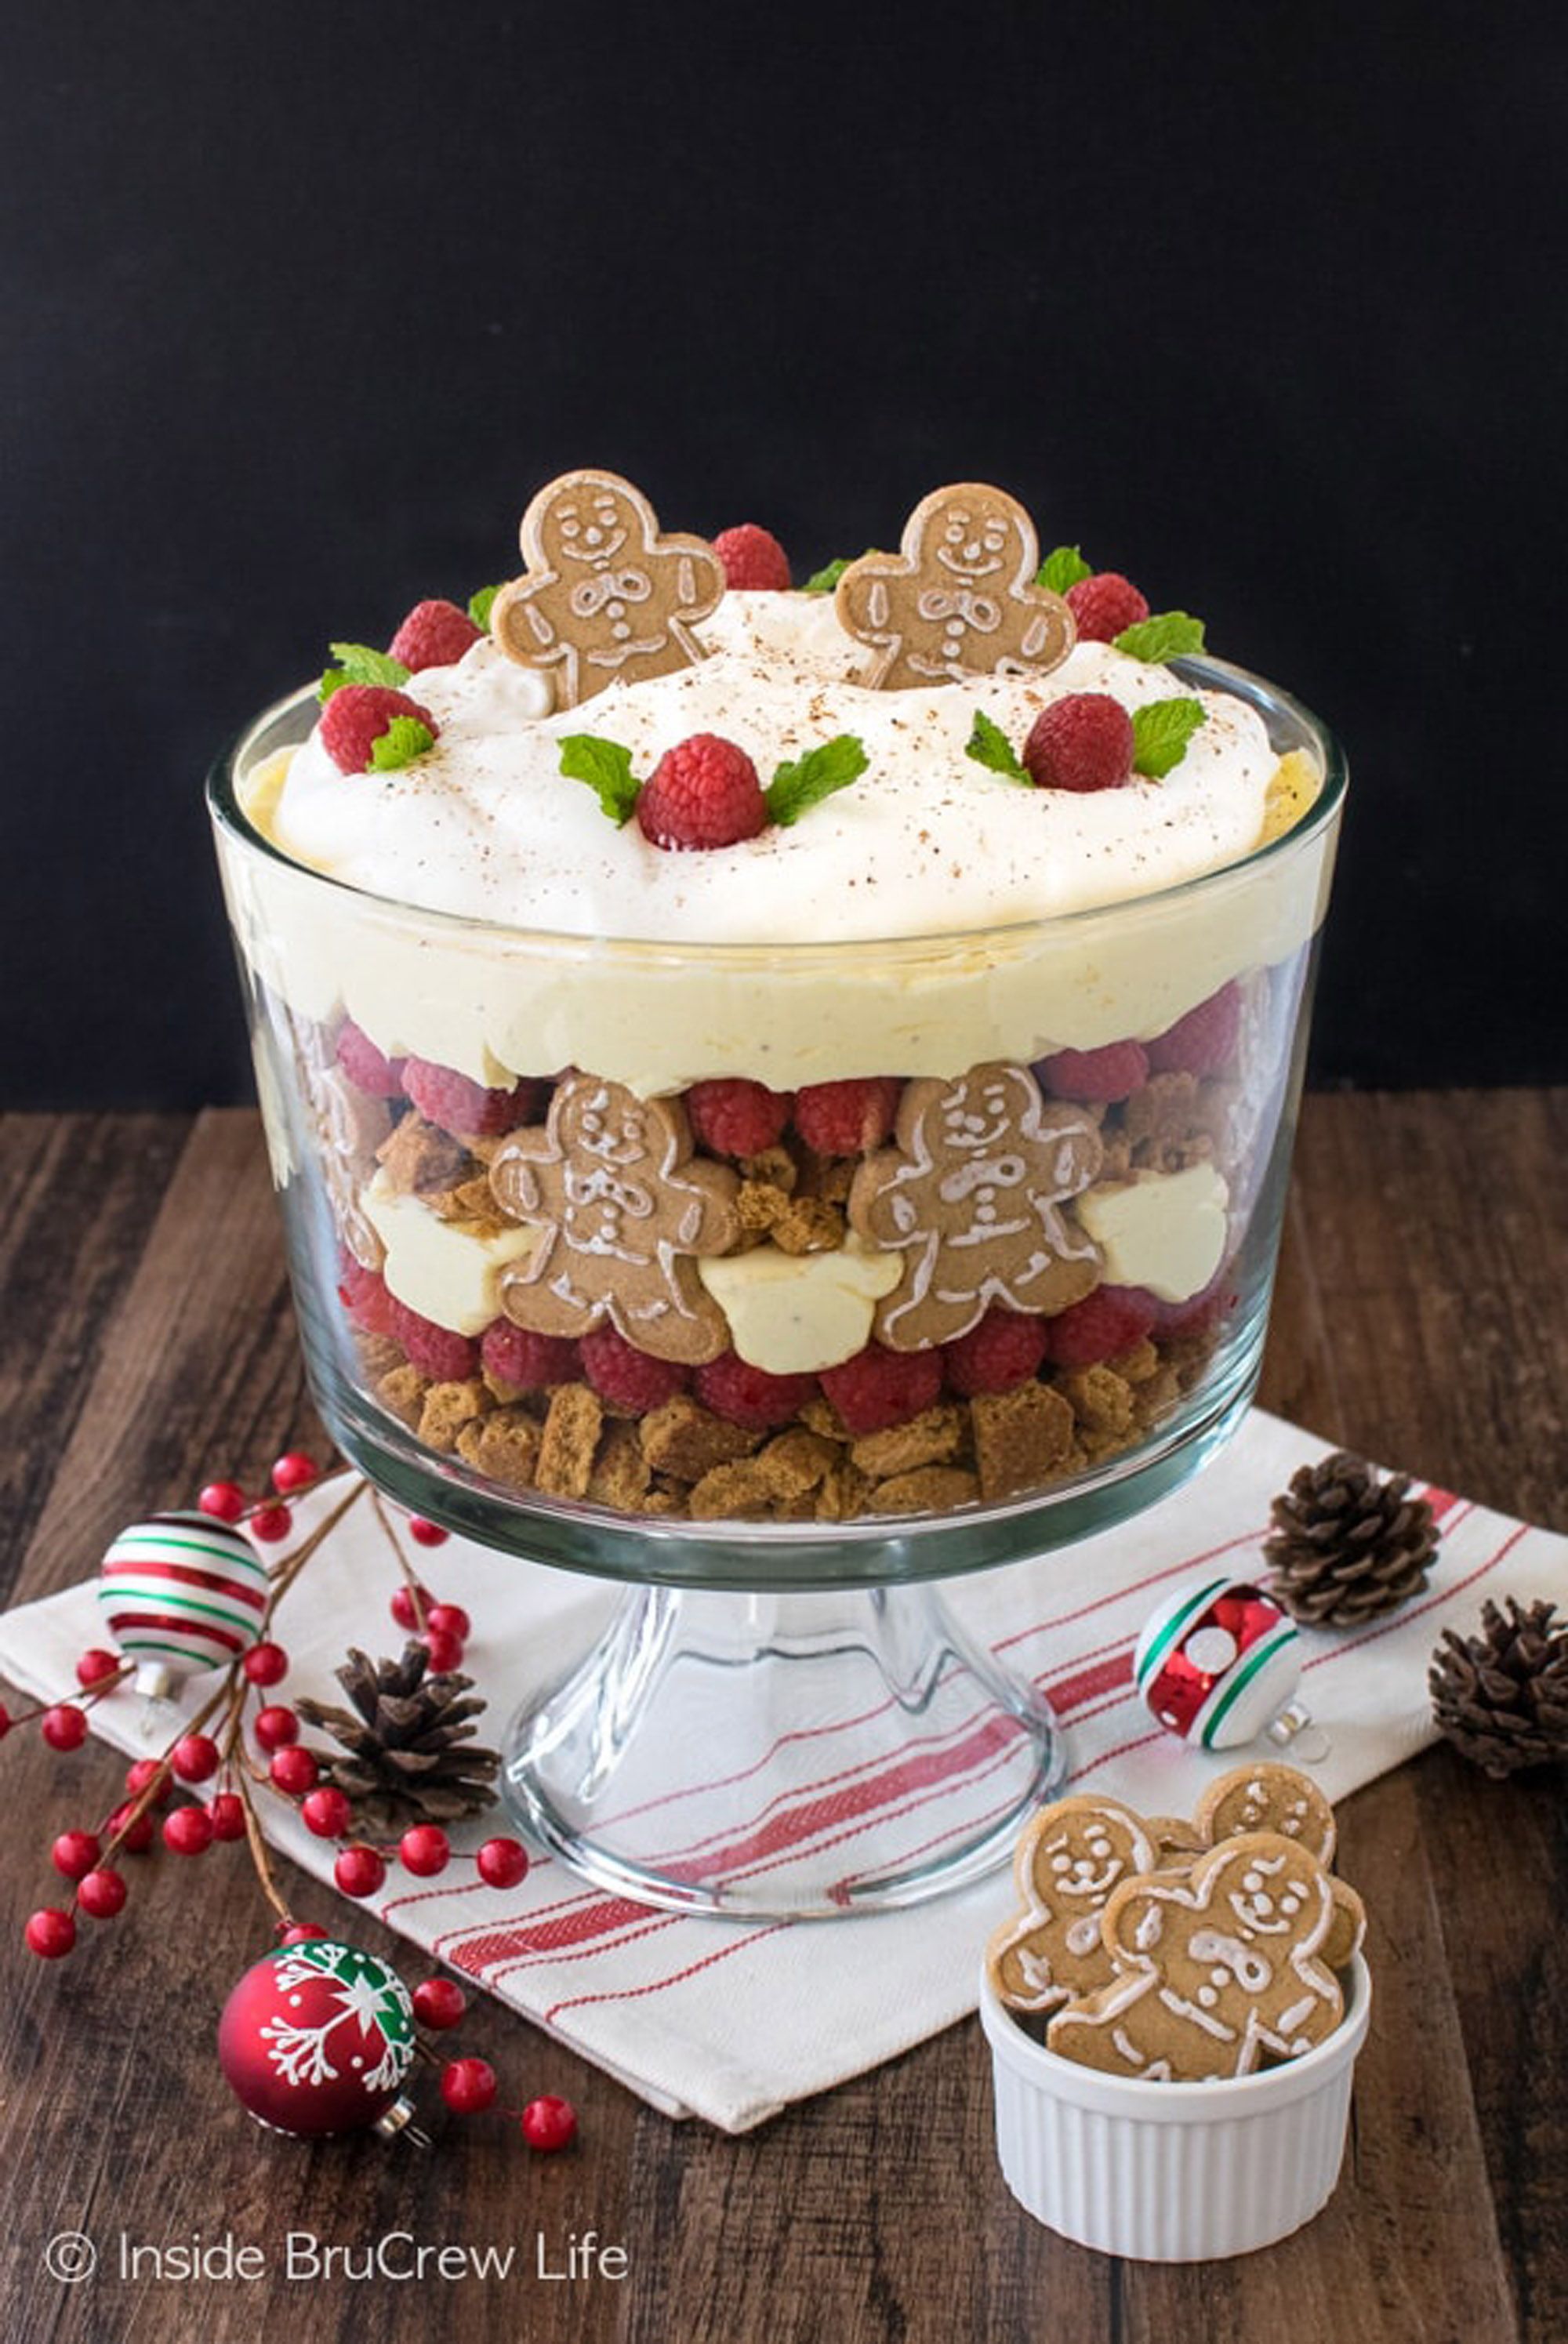 50 Easy Trifle Recipes Guests Will Love How To Make A Trifle